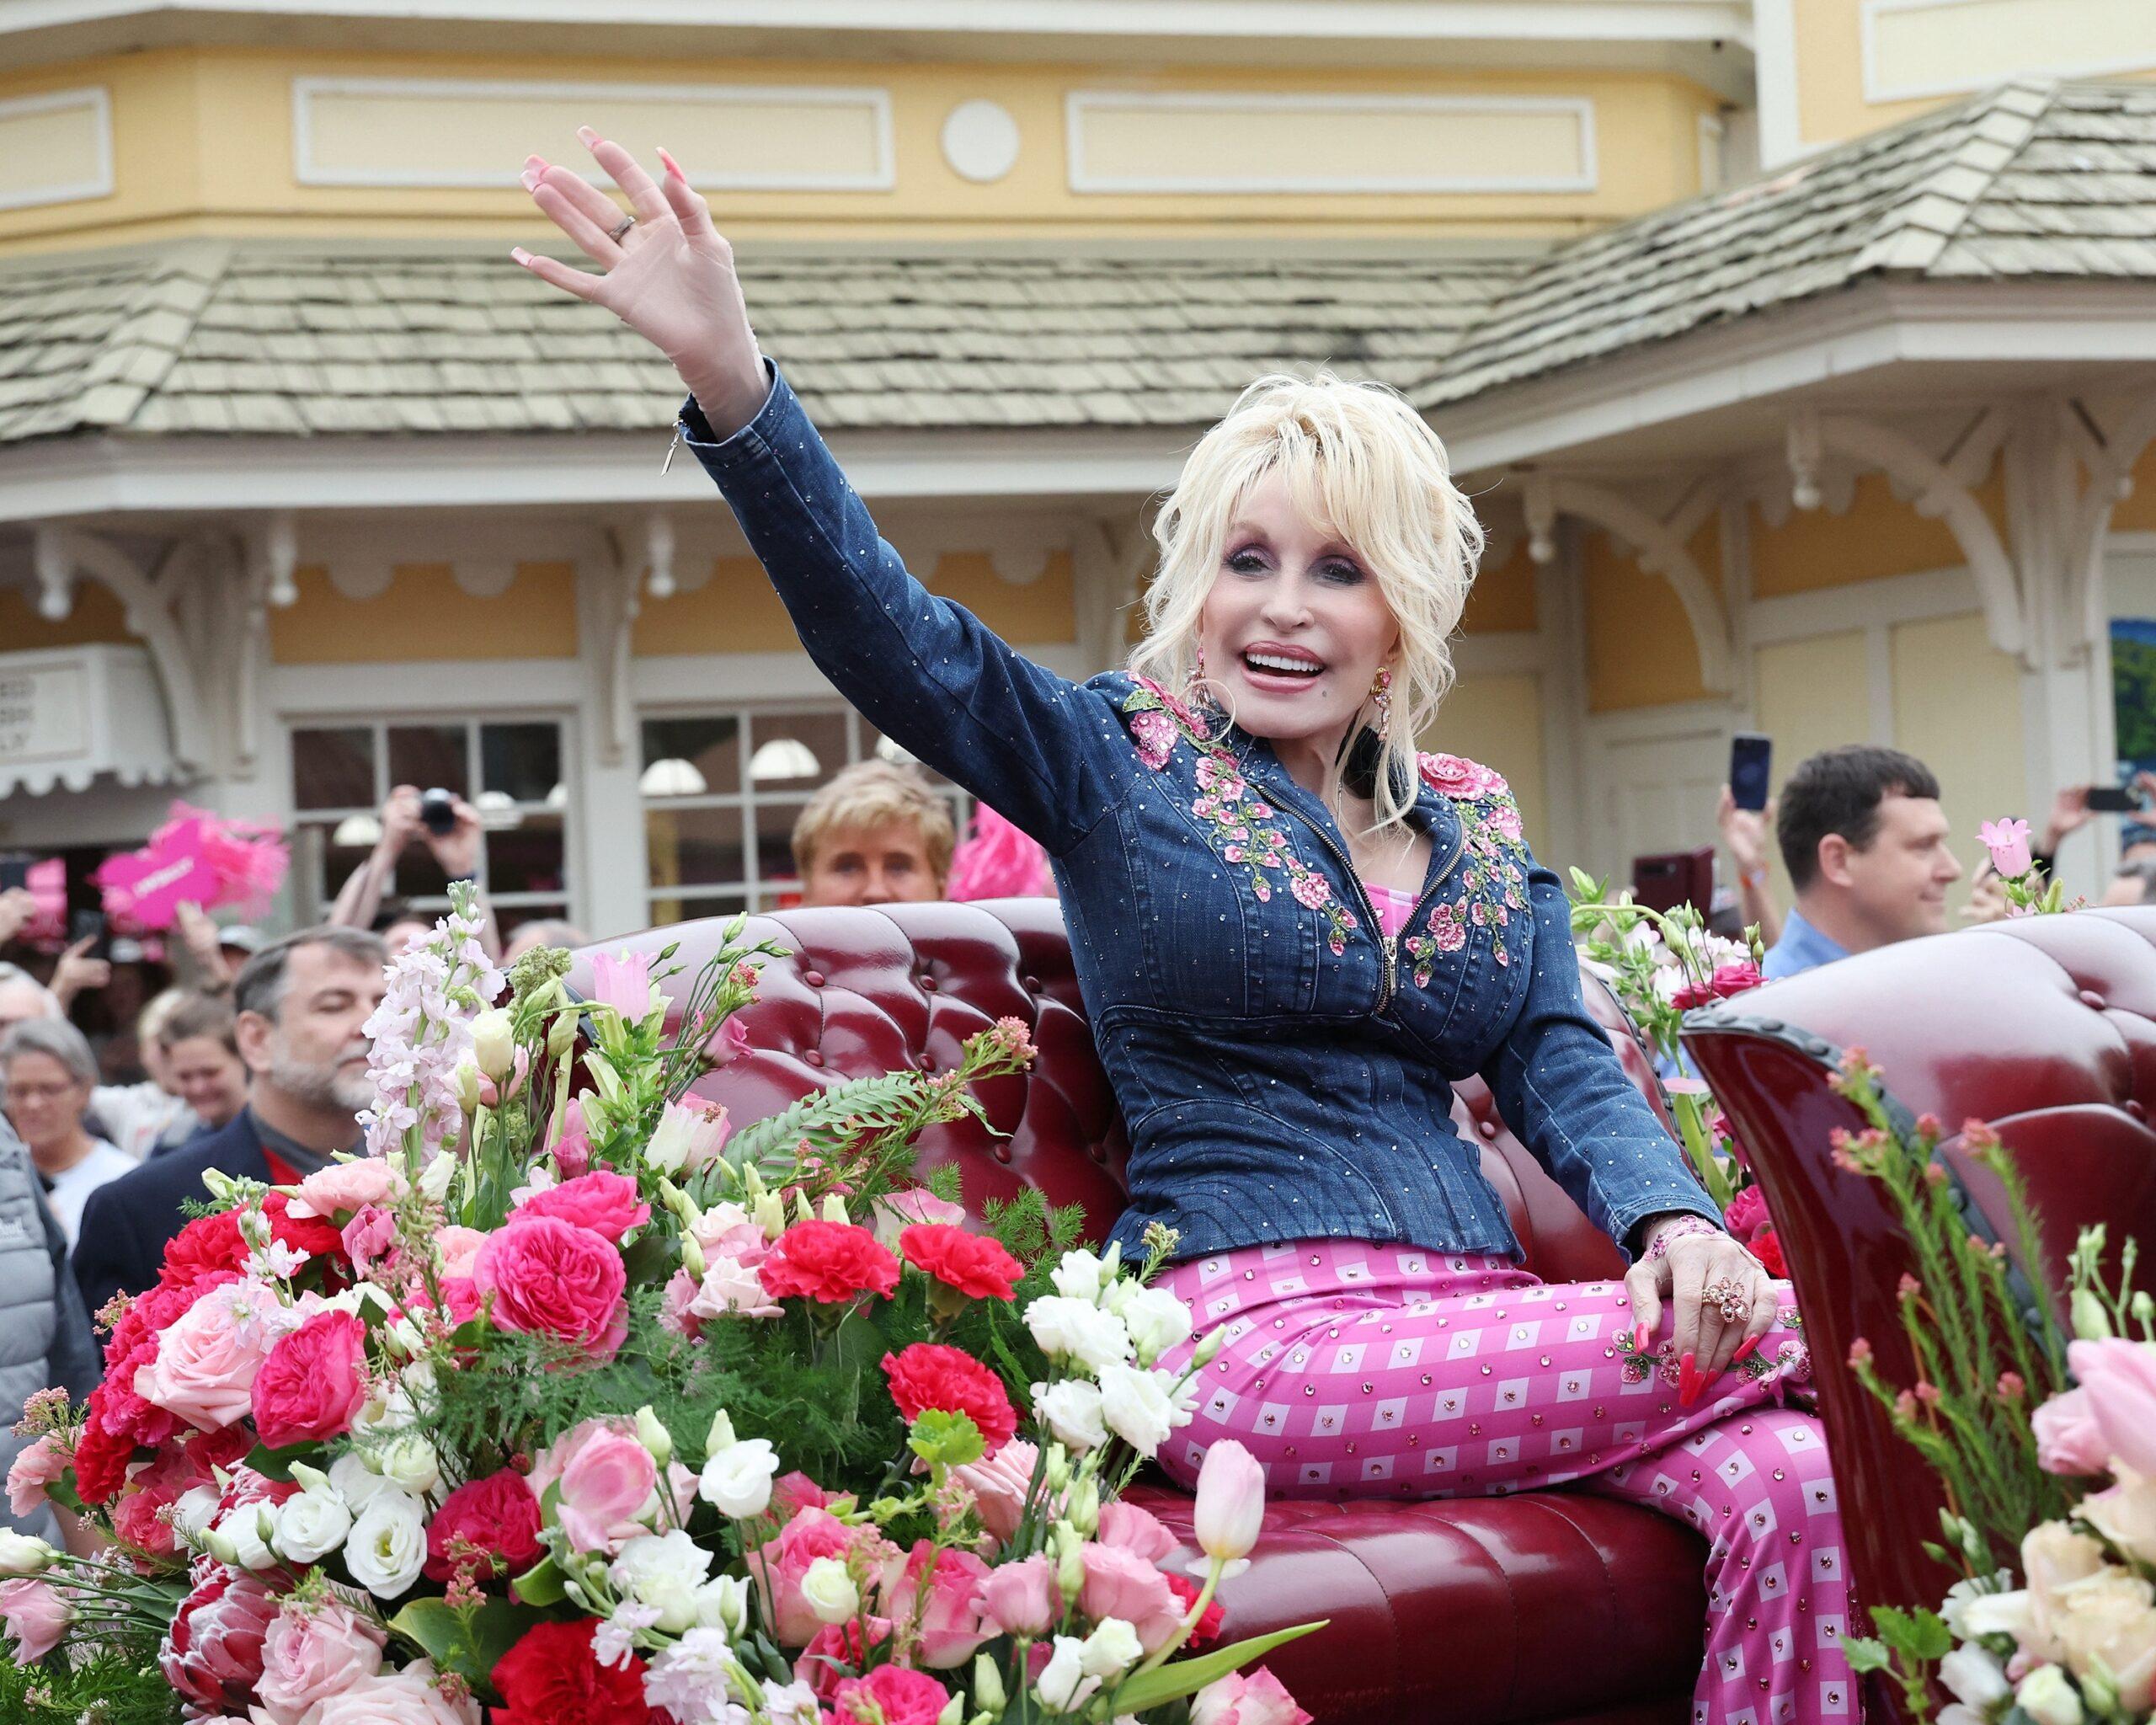 Dolly Parton waves to fans